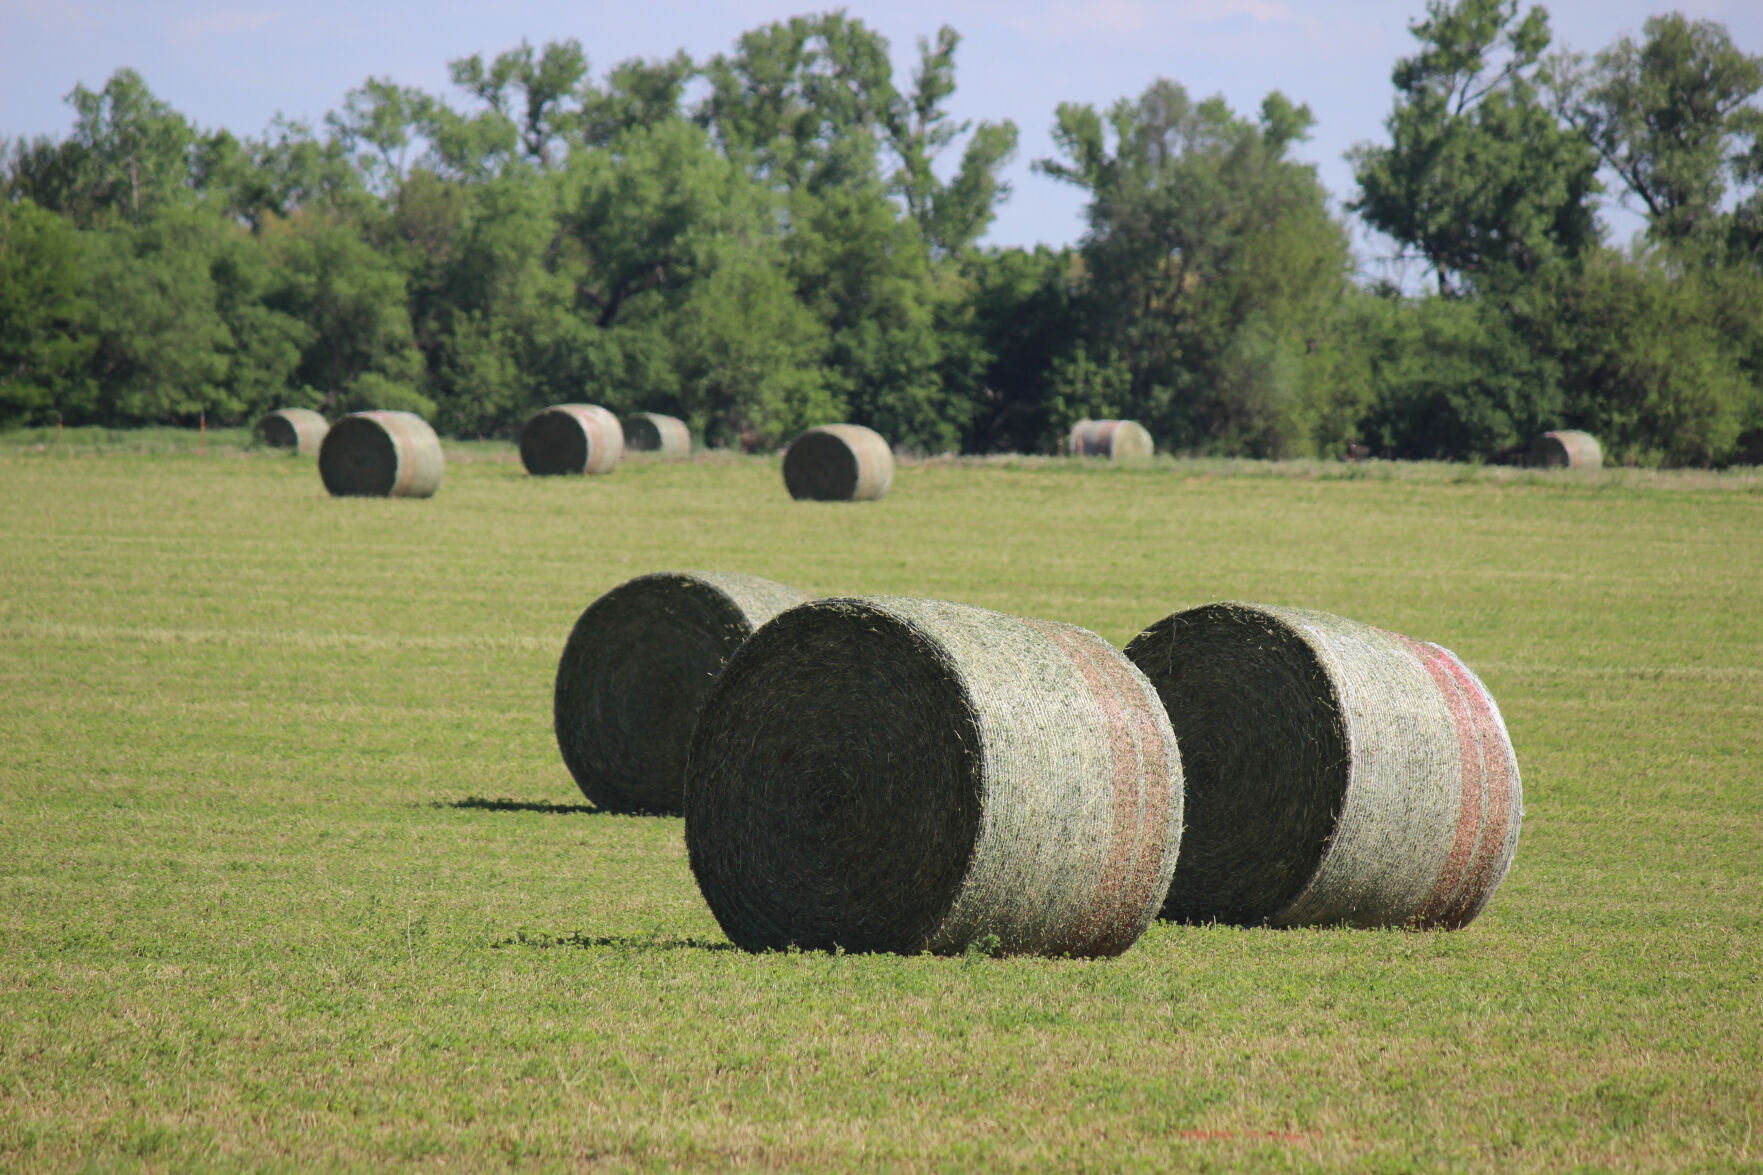 Hay bales (Journal photo by Lacey Newlin)